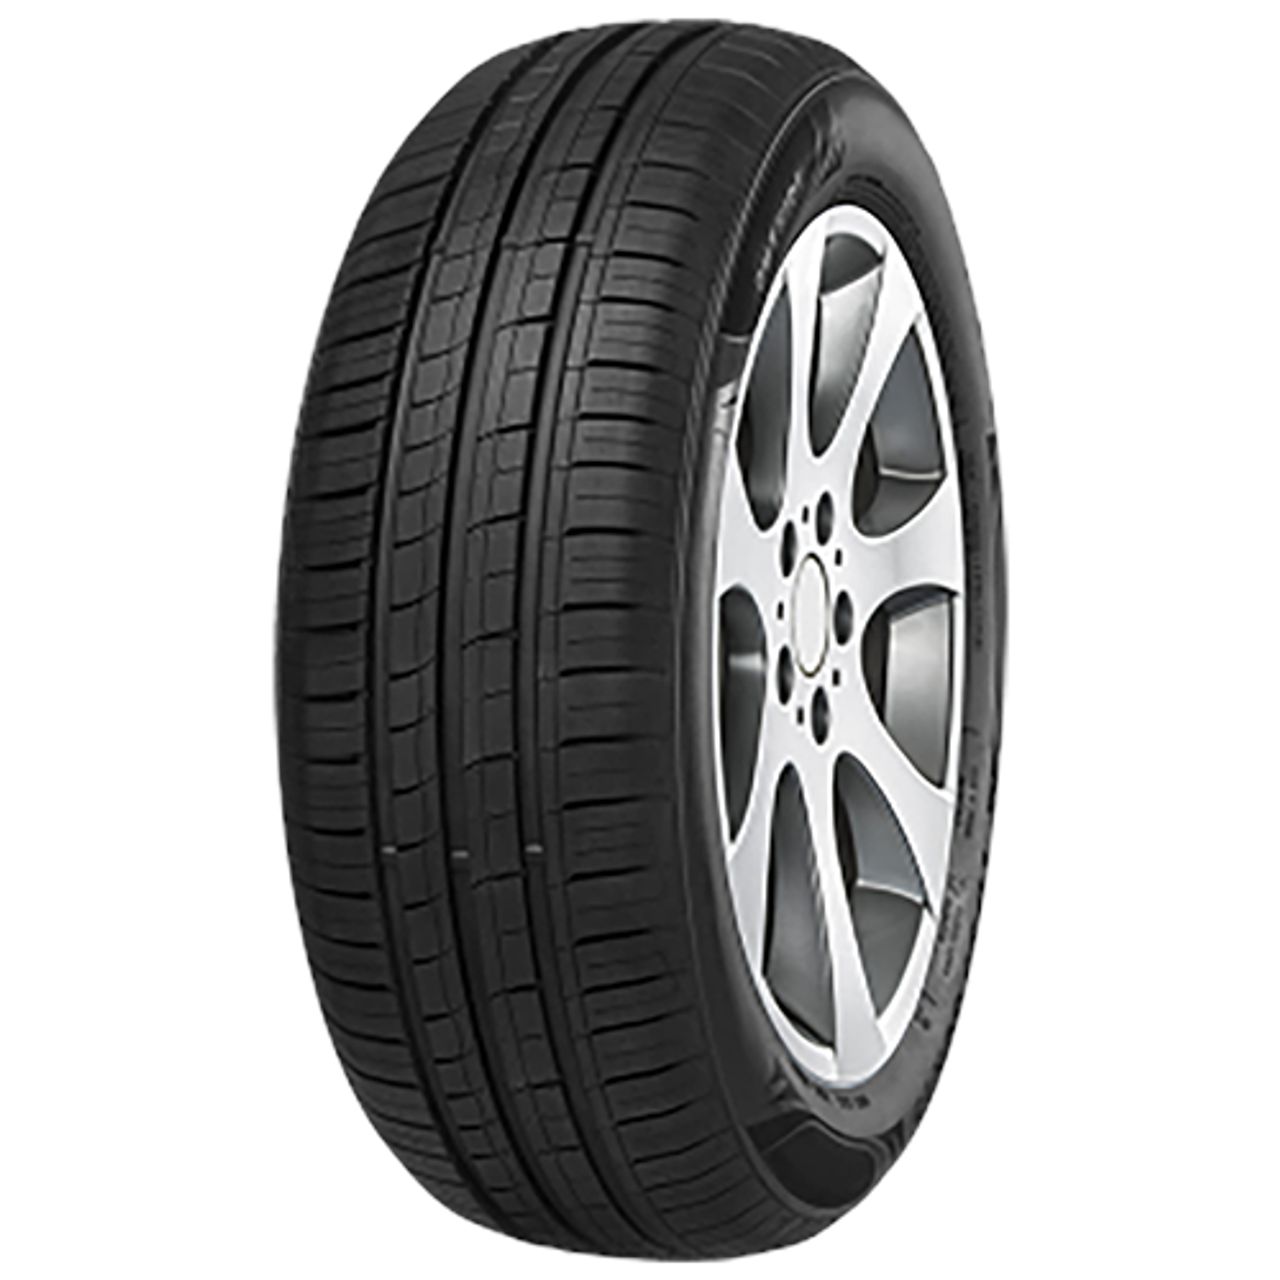 IMPERIAL ECODRIVER 4 185/65R14 86H